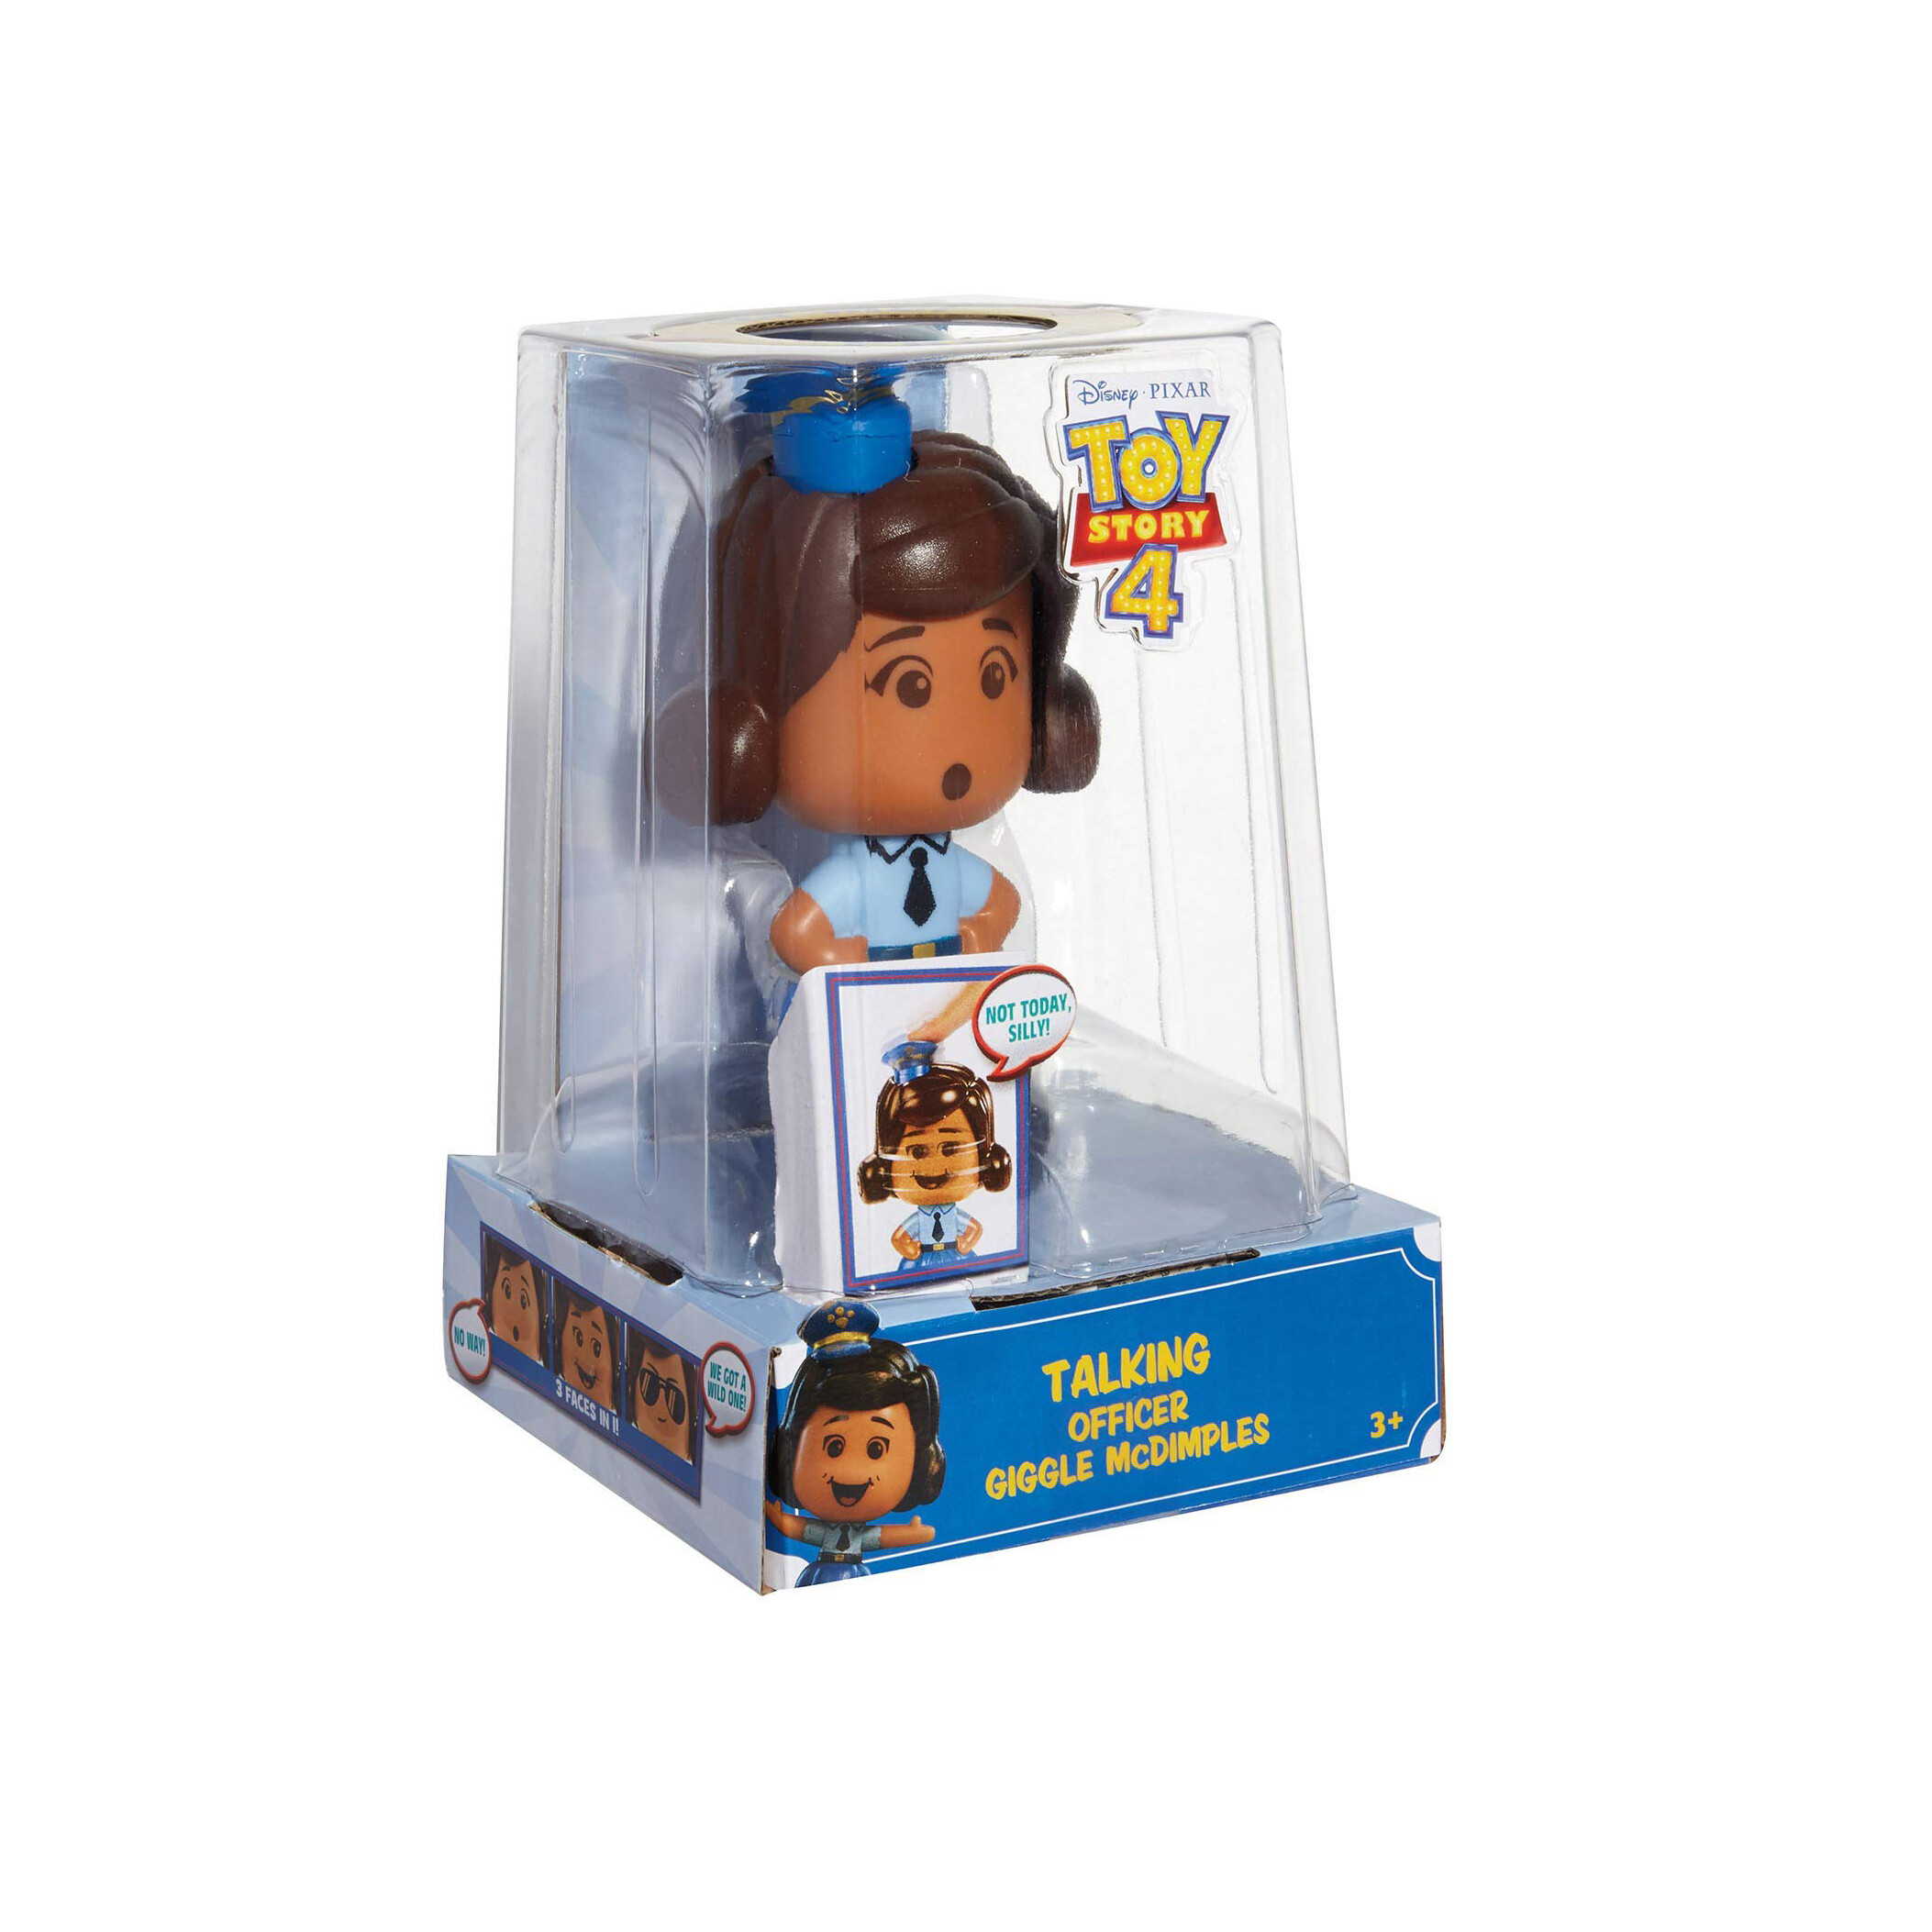 GIGGLE McDIMPLES 20 Details about   DISNEY PIXAR TOY STORY 4-  TALKING OFFICER SOUNDS 3 FACES 